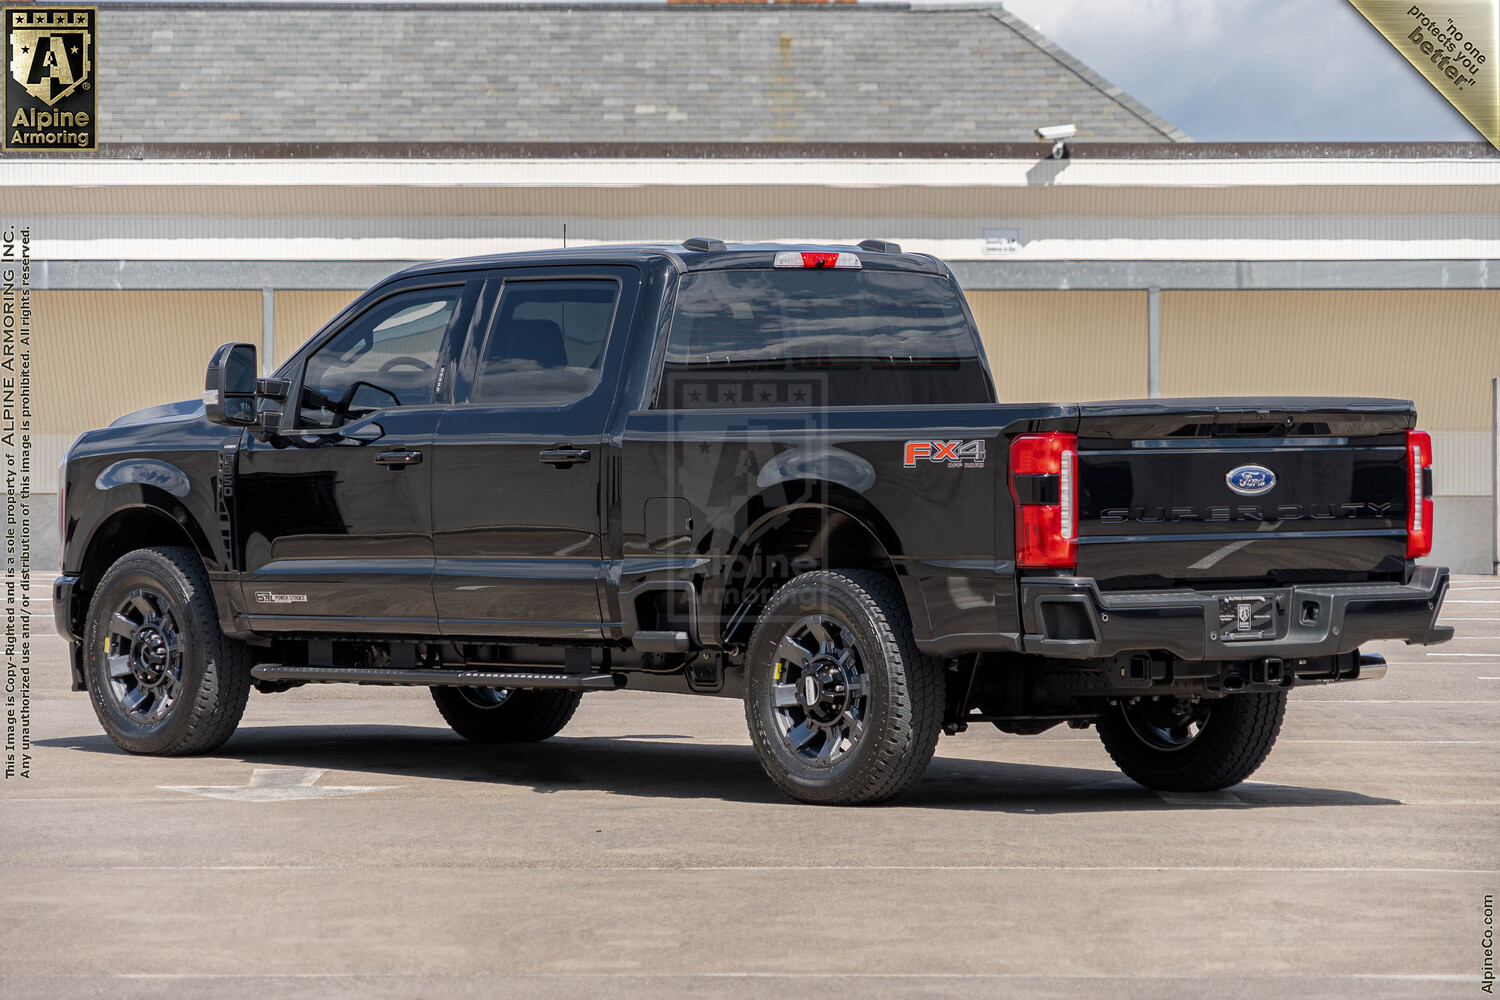 Inventory Pickup Truck Ford F350 SRW VIN:7404 Exterior Interior Images	